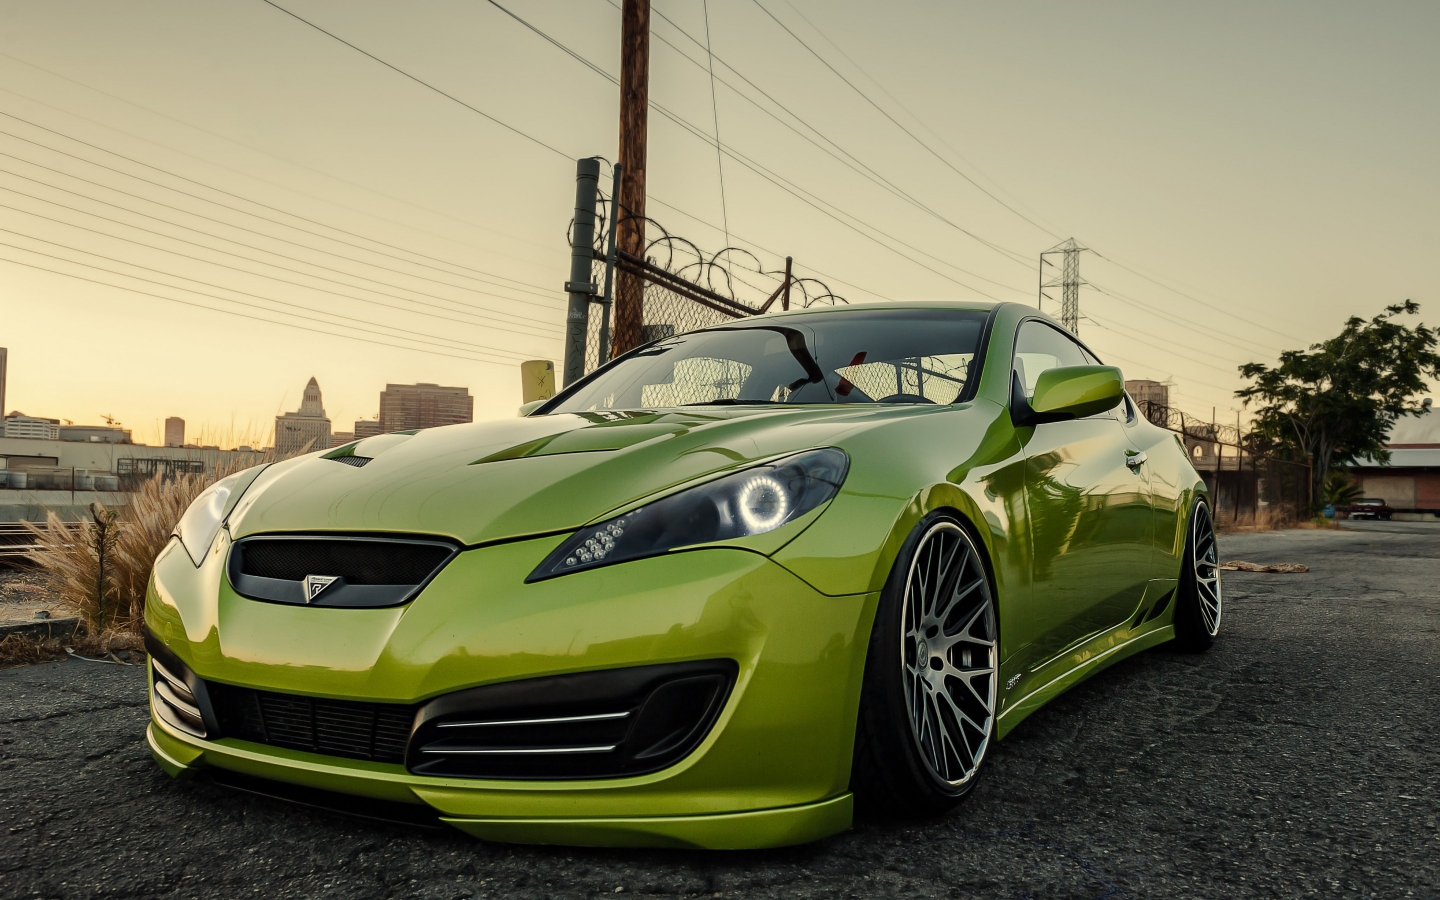 Stanced Hyundai Genesis Coupe for 1440 x 900 widescreen resolution